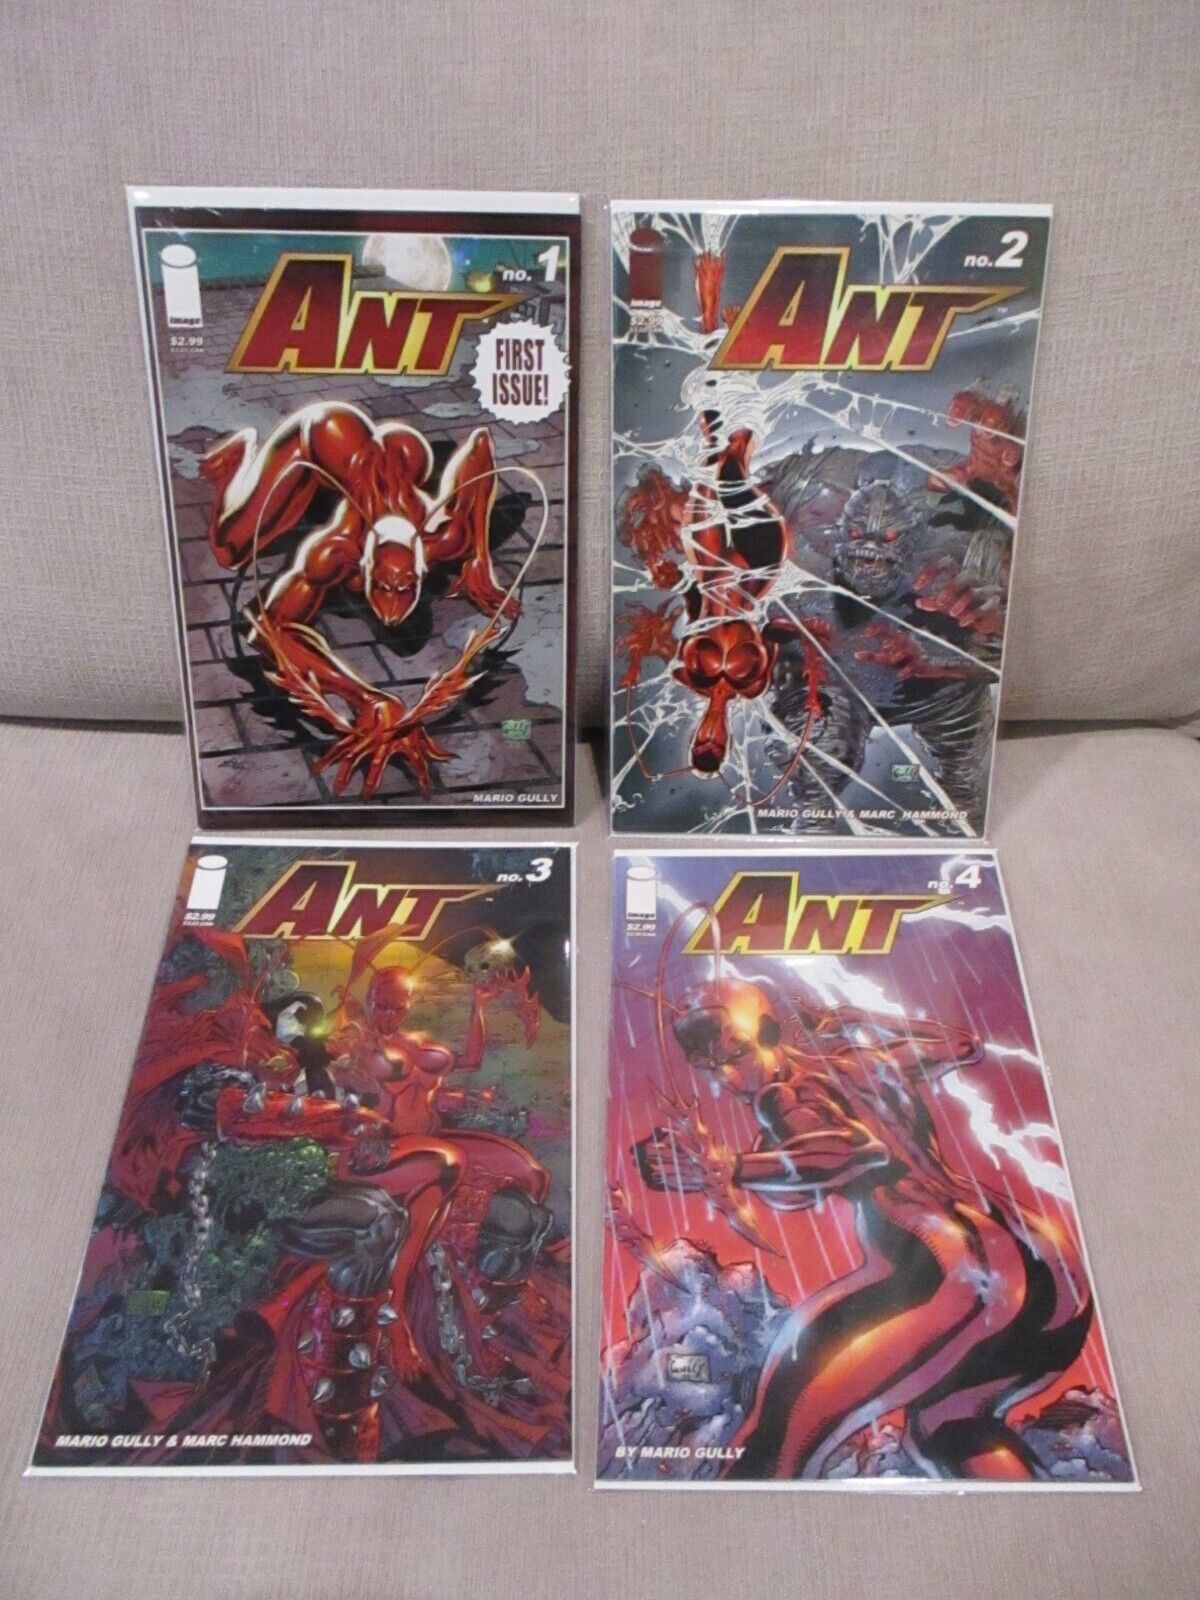 ANT Vol. 2 #1-4 Lot Image Comics 2005 Mario Gully Bagged & Boarded - Spawn